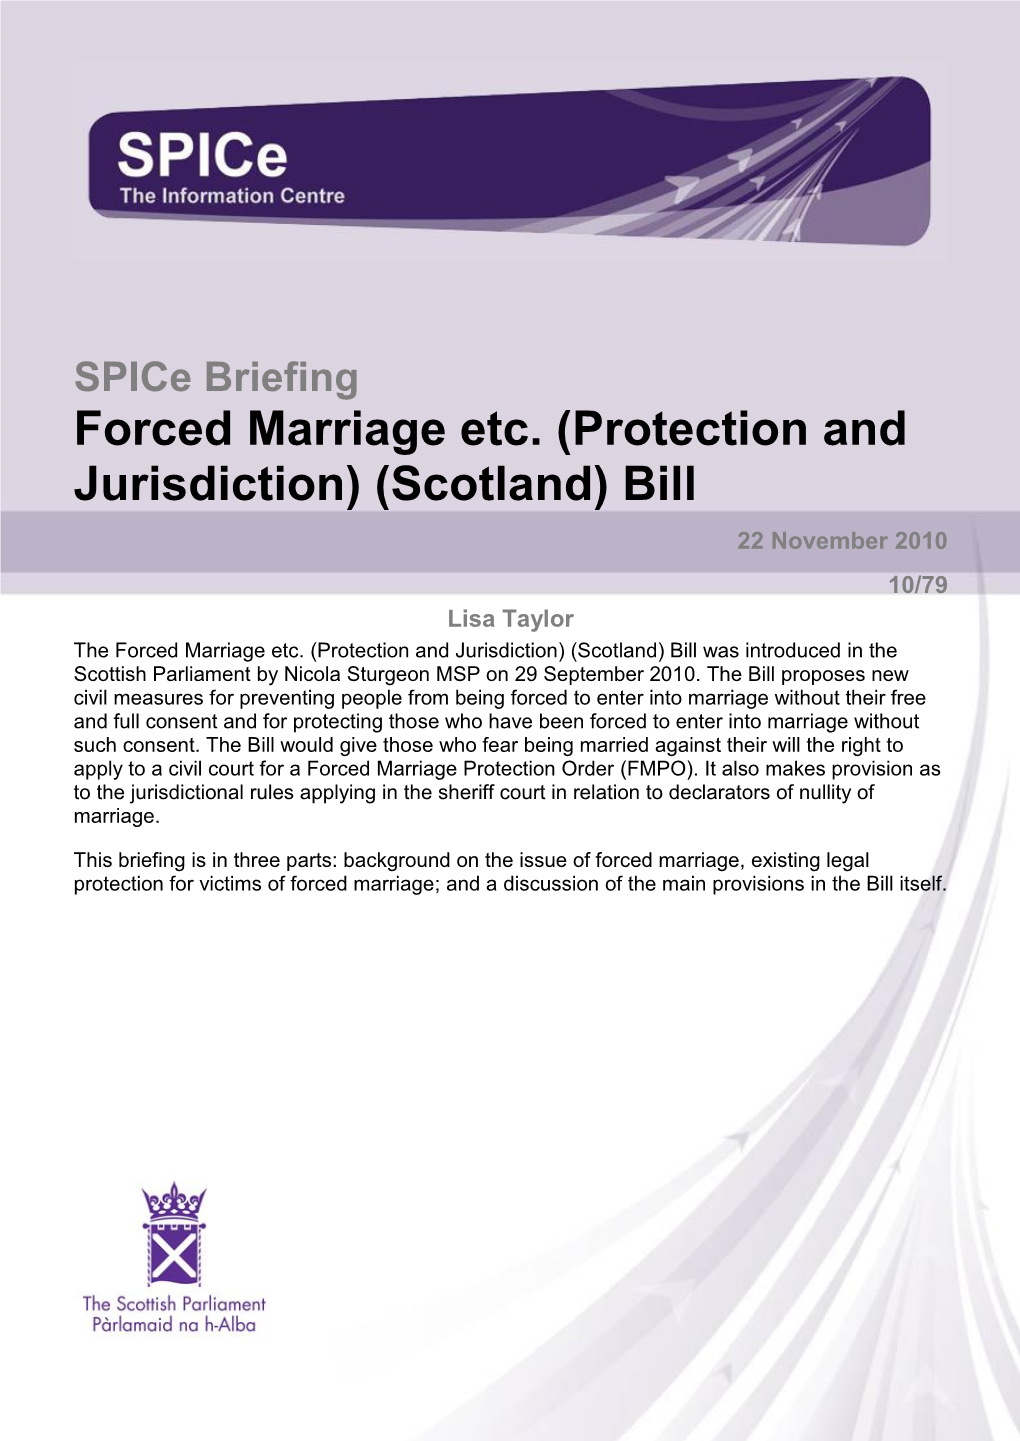 Forced Marriage Etc. (Protection and Jurisdiction) (Scotland) Bill 22 November 2010 10/79 Lisa Taylor the Forced Marriage Etc